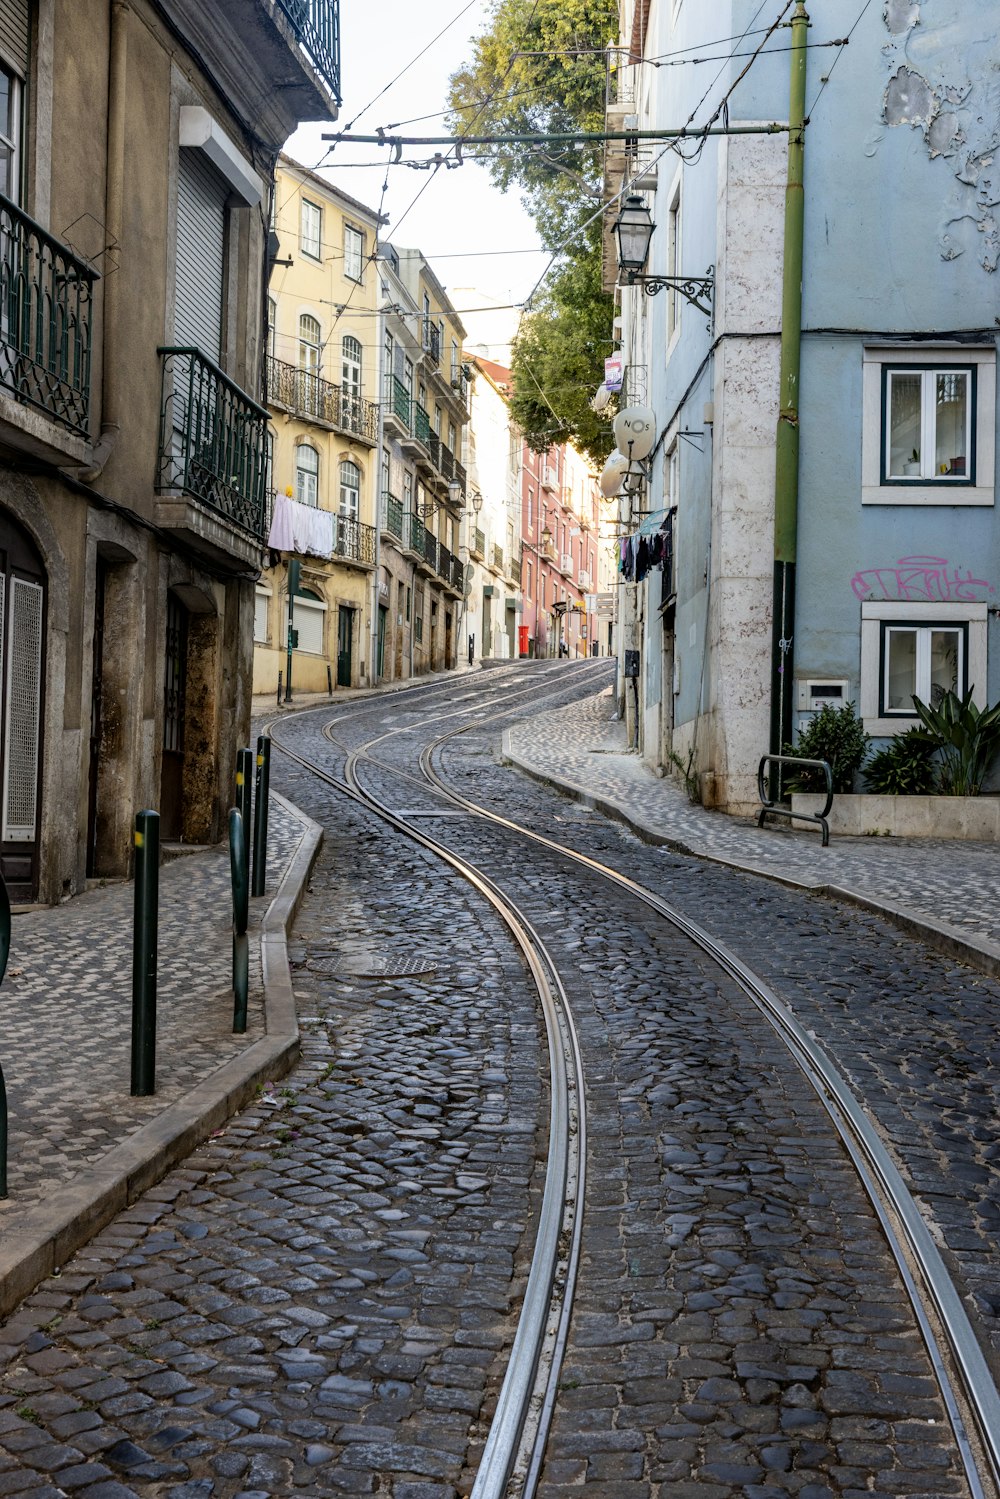 a cobblestone street with a train track running through it